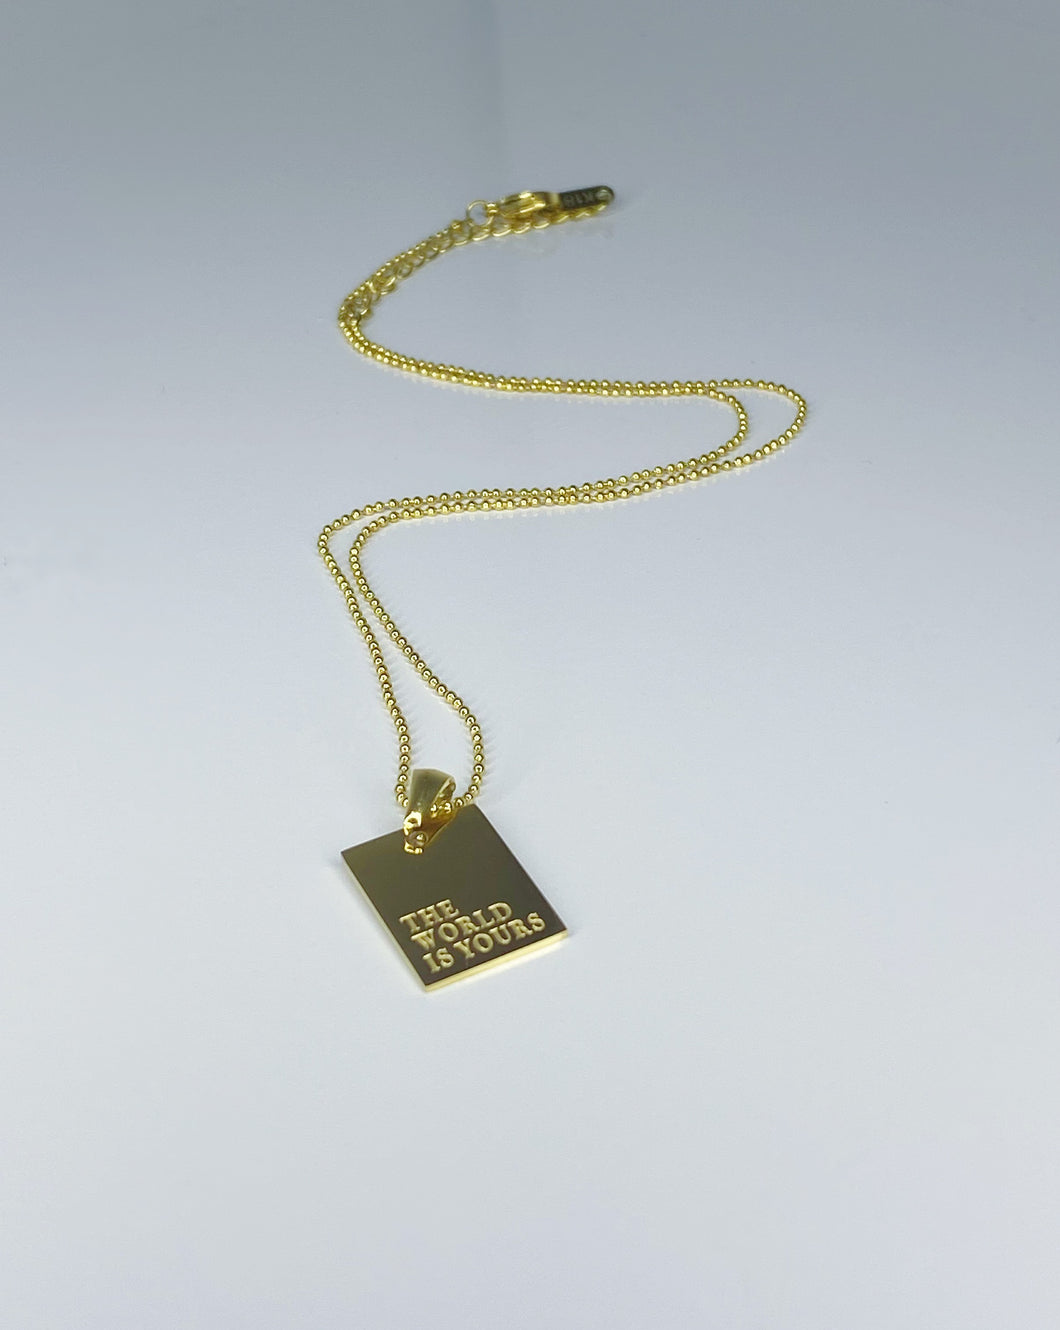 THE WORLD IS YOURS: POSITIVE AFFIRMATION NECKLACE